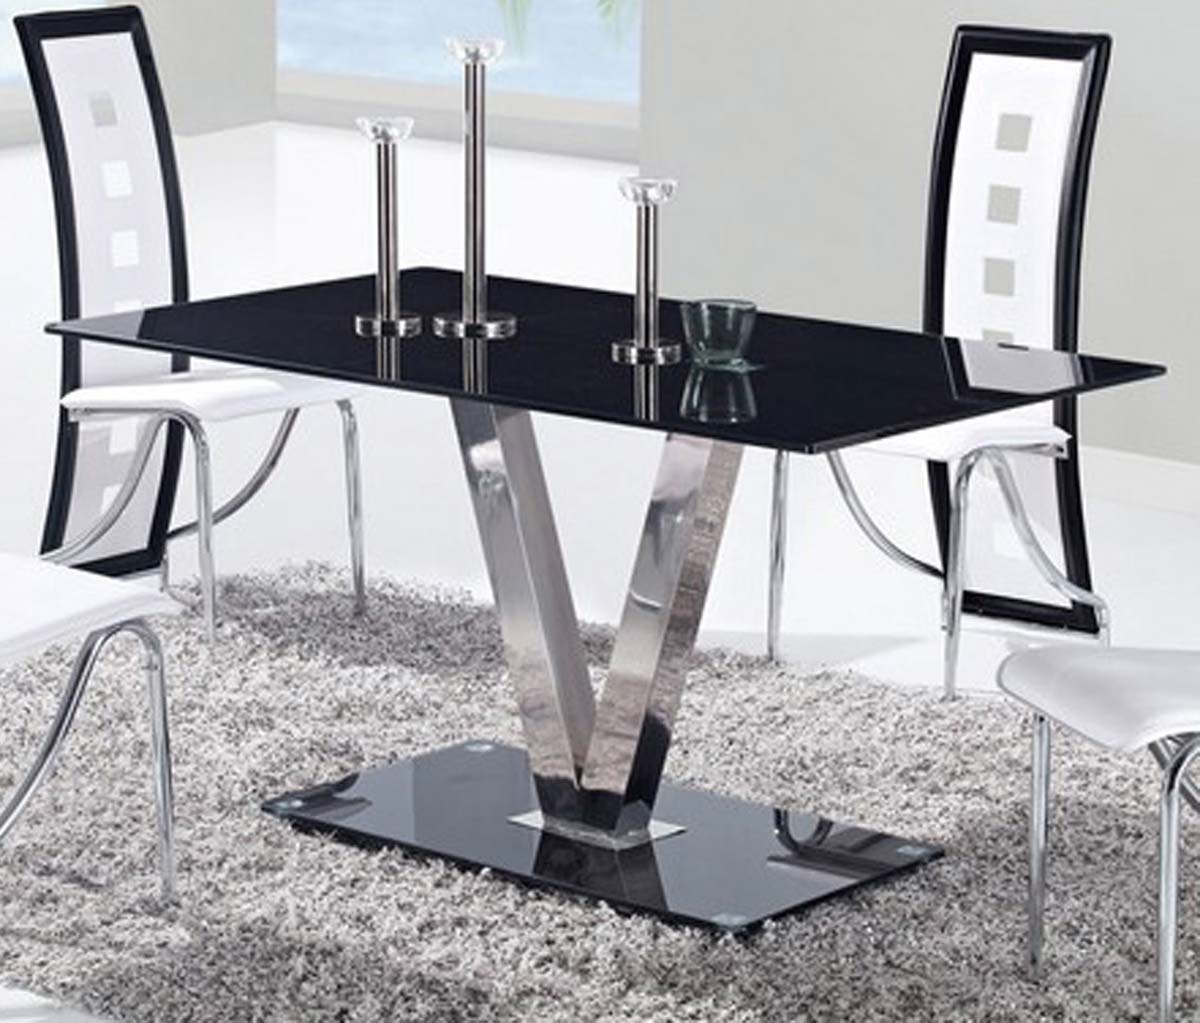 Global Furniture USA 551 Dining Table - Black - Stainless Steel Legs